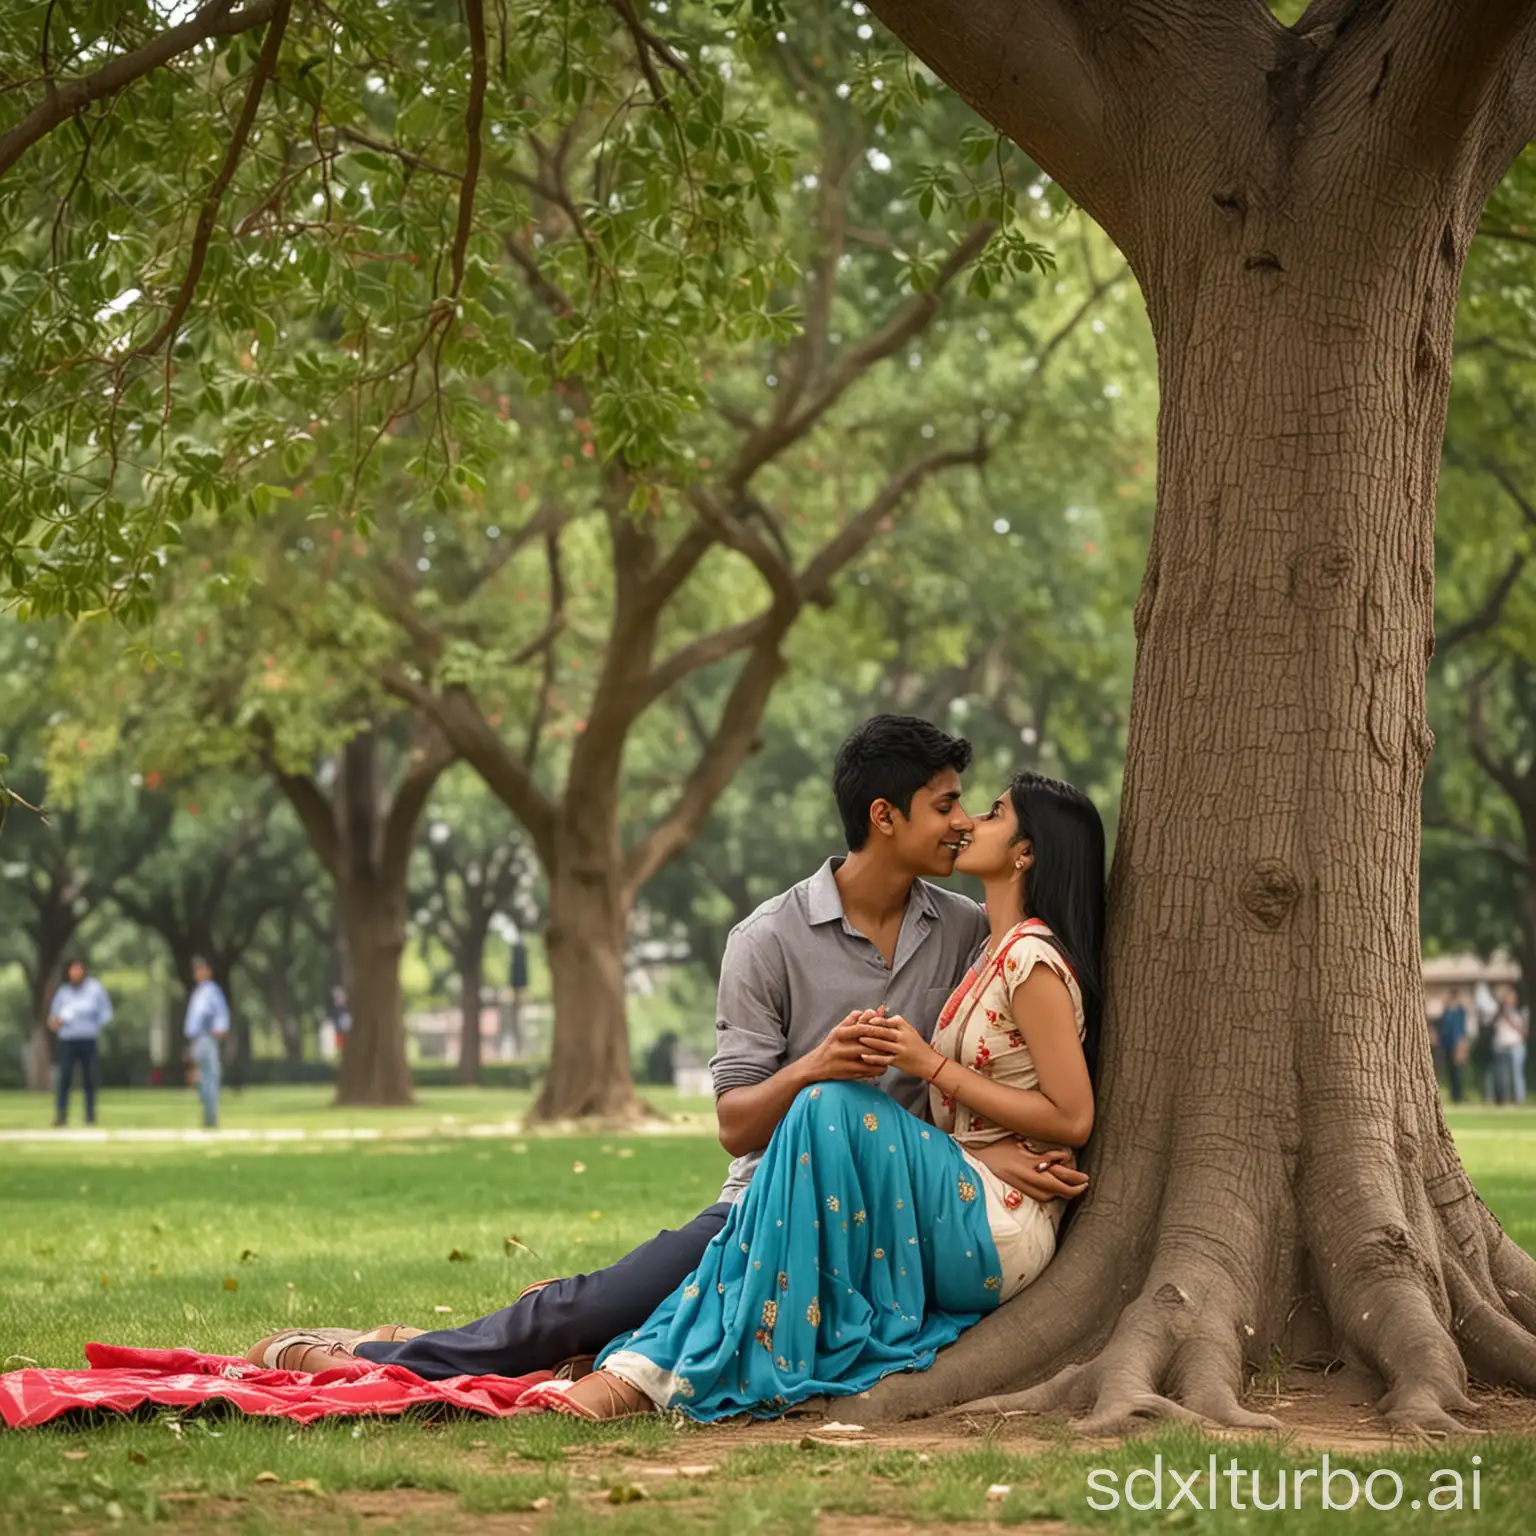 An Indian college boy and a girl are having a romantic moment under a tree on a college campus